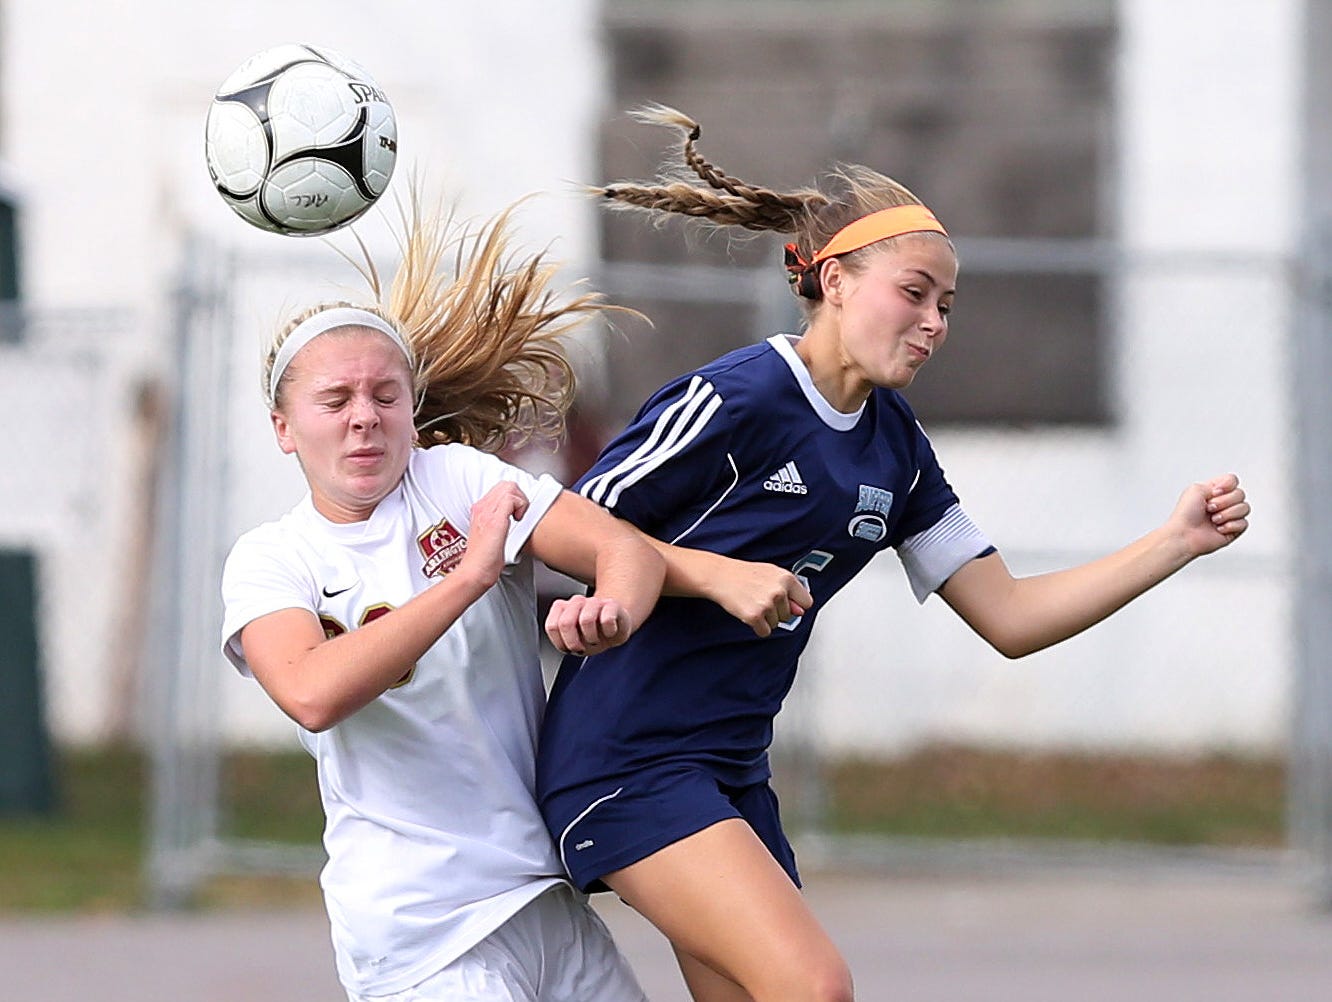 From left, Arlington's Molly Feign (29) and Suffern's Abby Bosco (5) battle for ball control during the girls soccer Section 1 Class AA championship game at Yorktown High School Oct. 30, 2016. Arlington won the game 2-0.